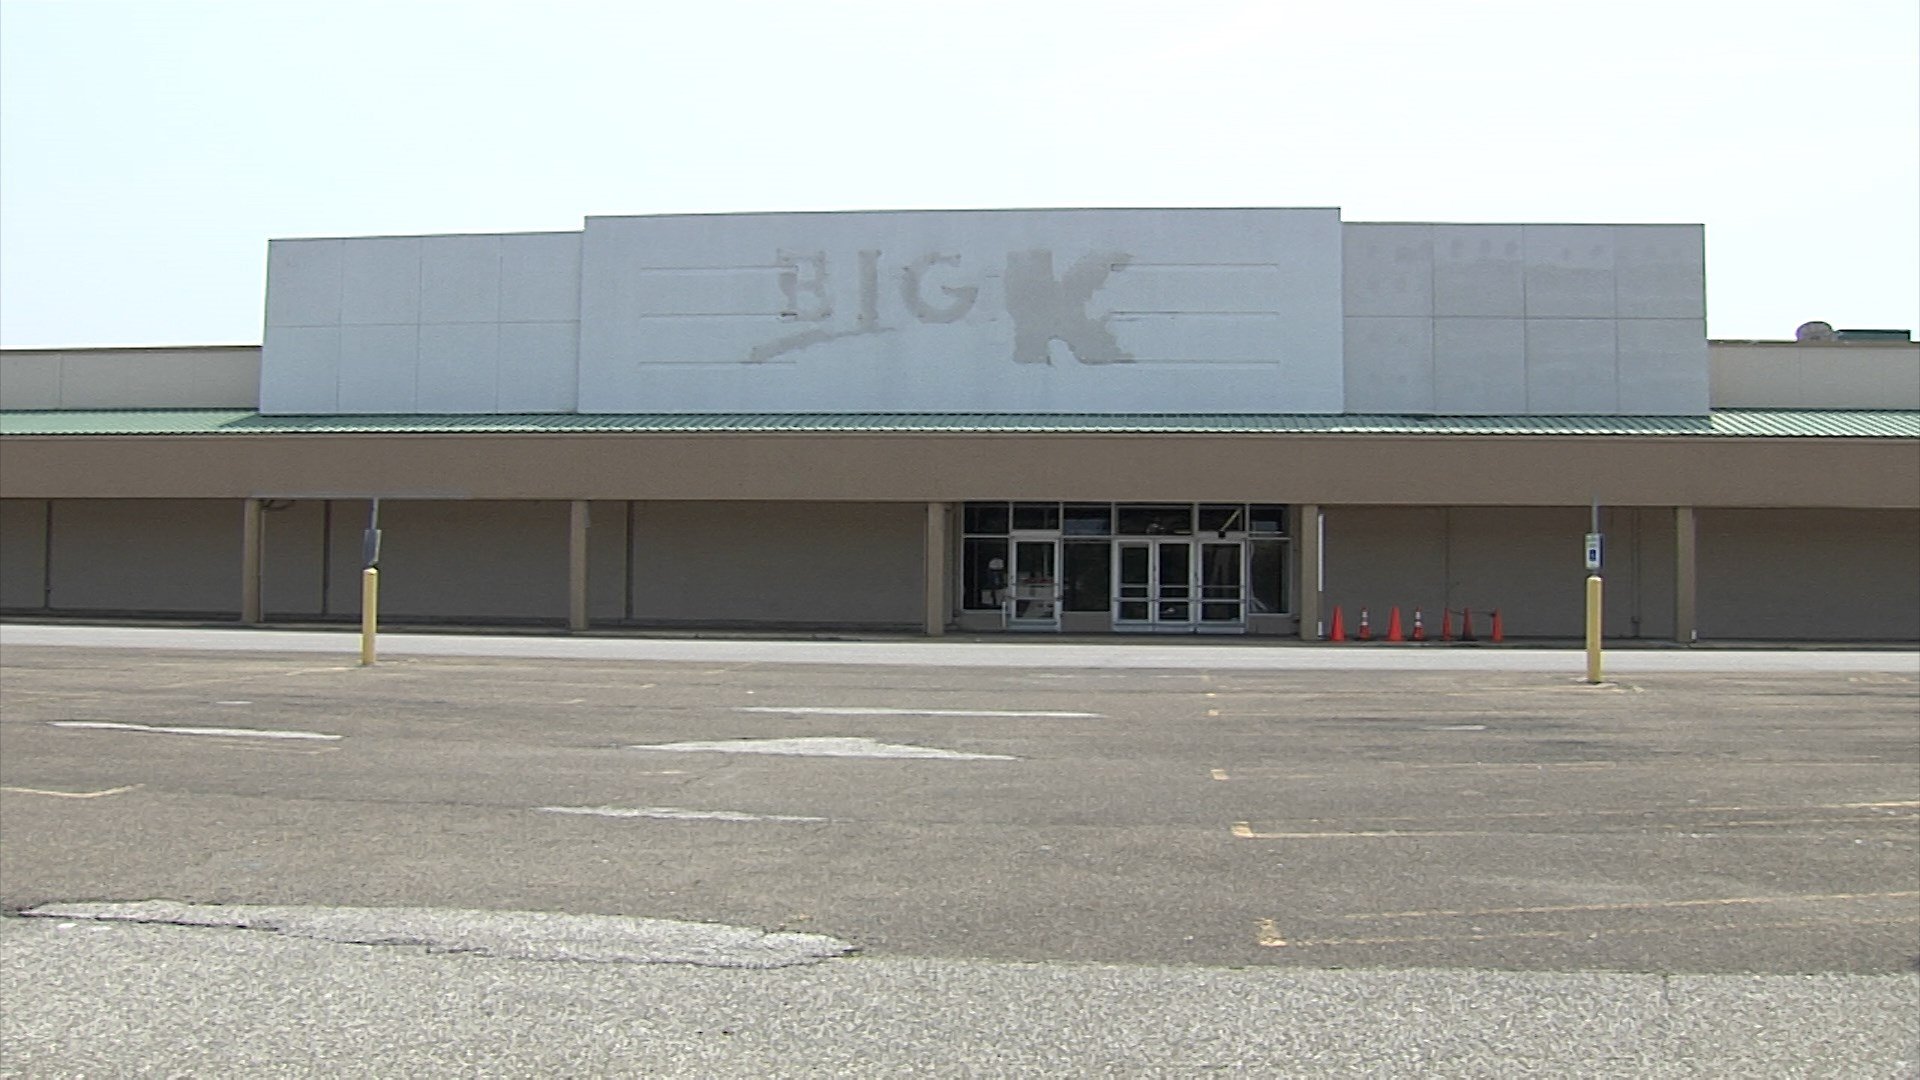 Harborcreek Supervisors Accept $4.4 Million Dollar Appraisal In Hopes of Bringing New Life to Vacant Building